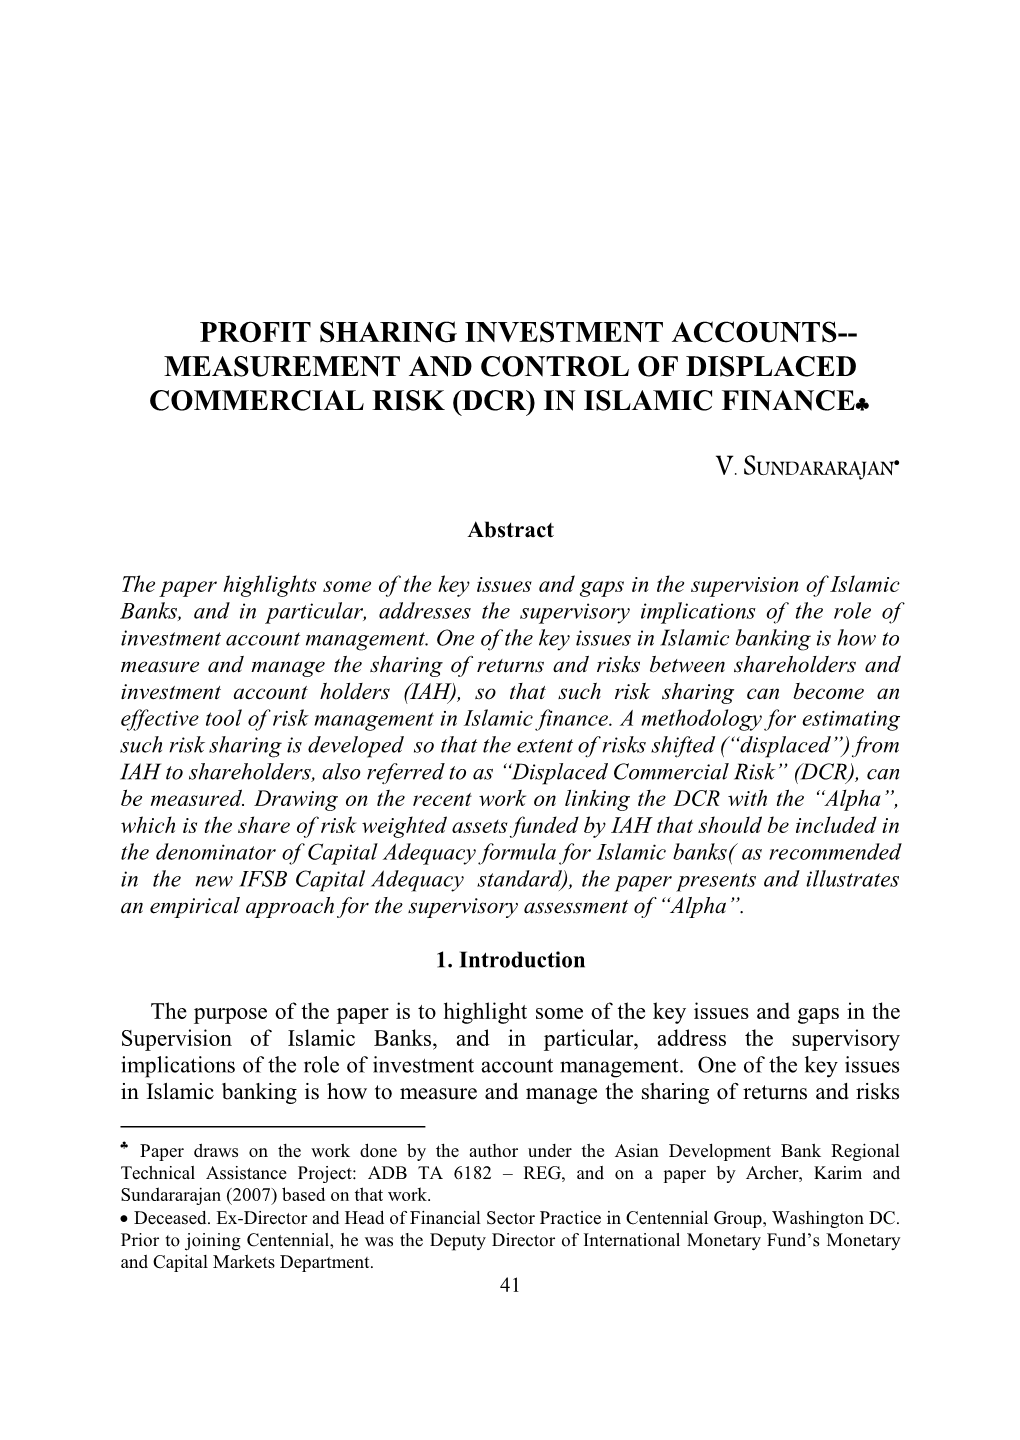 Issues and Challenges in the Implementing Strengthened Supervisory Standards for Islamic Banks: the Role of Investment Accoun